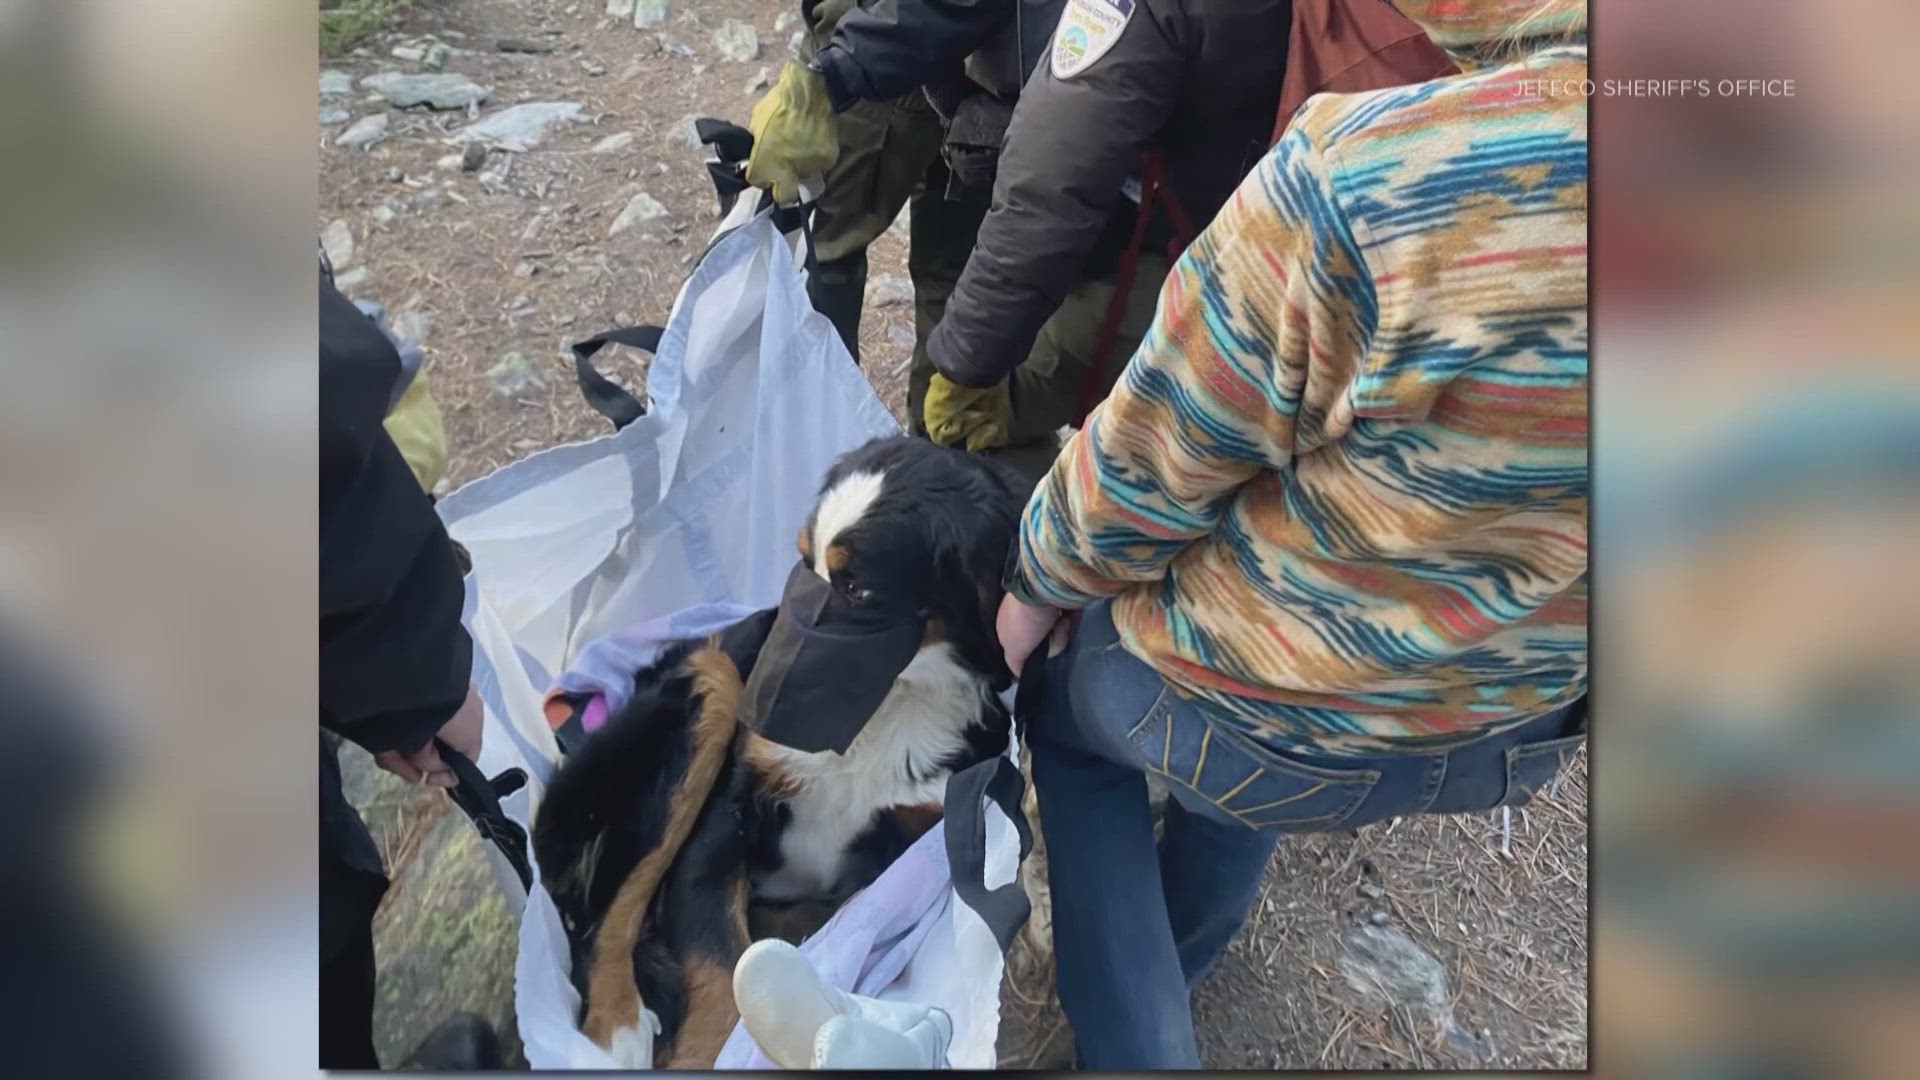 Nova's owners were reunited with the pup after hikers found the dog in Meyer Ranch Park suffering from a broken leg.